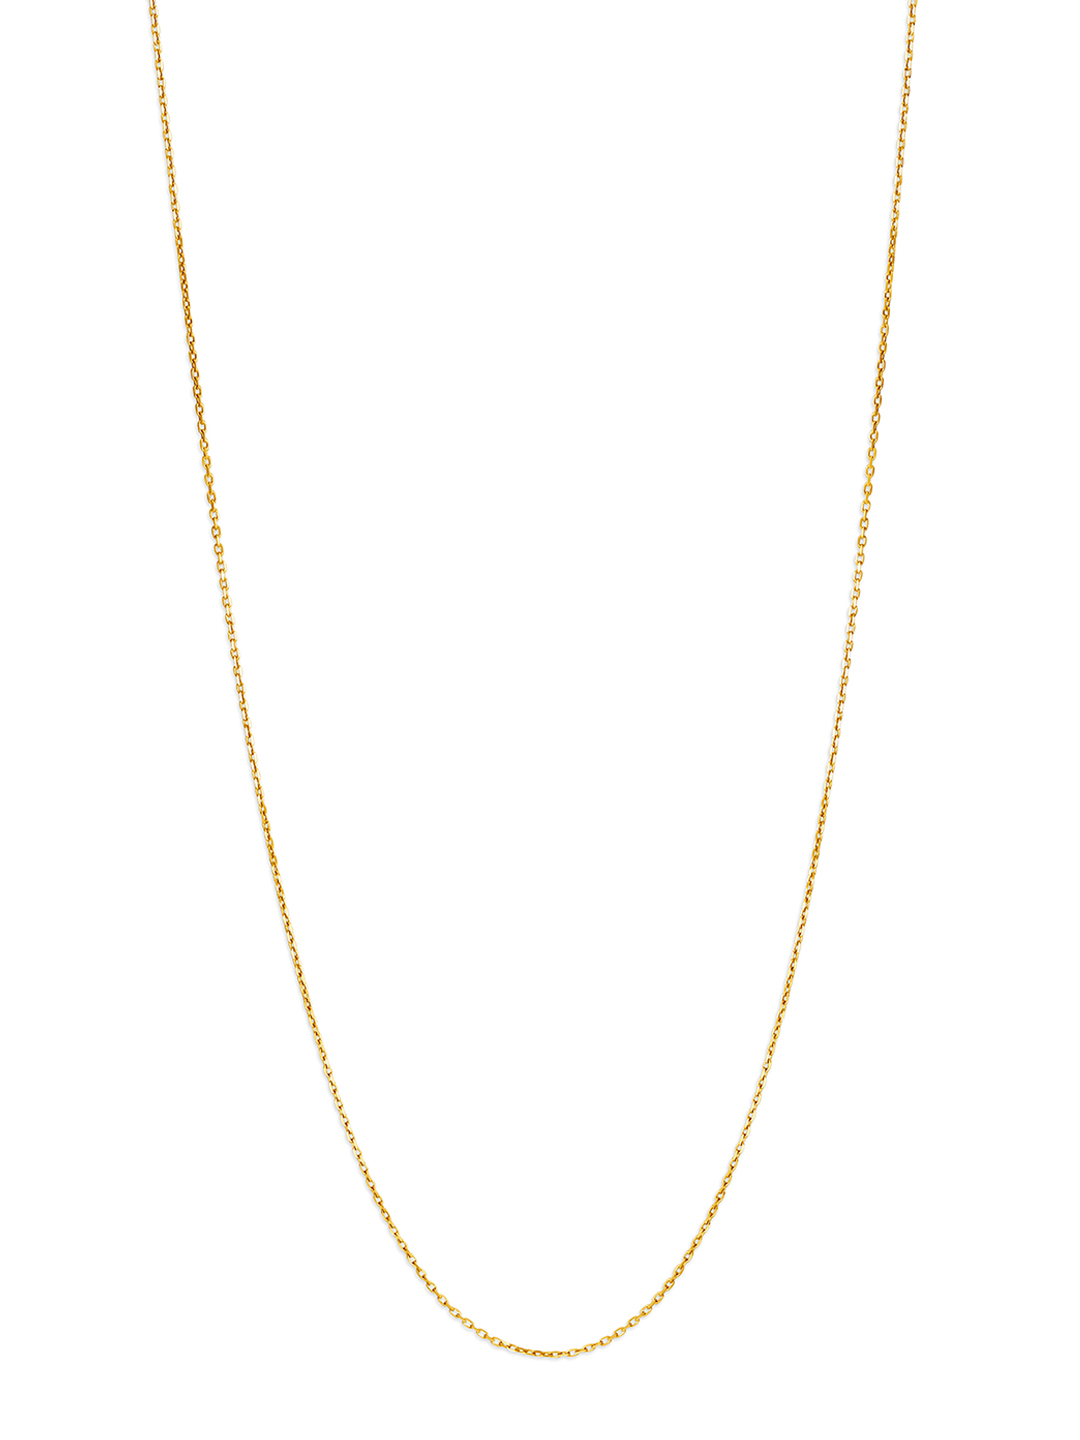 Mia by Tanishq 14KT Yellow Gold Chain Price in India